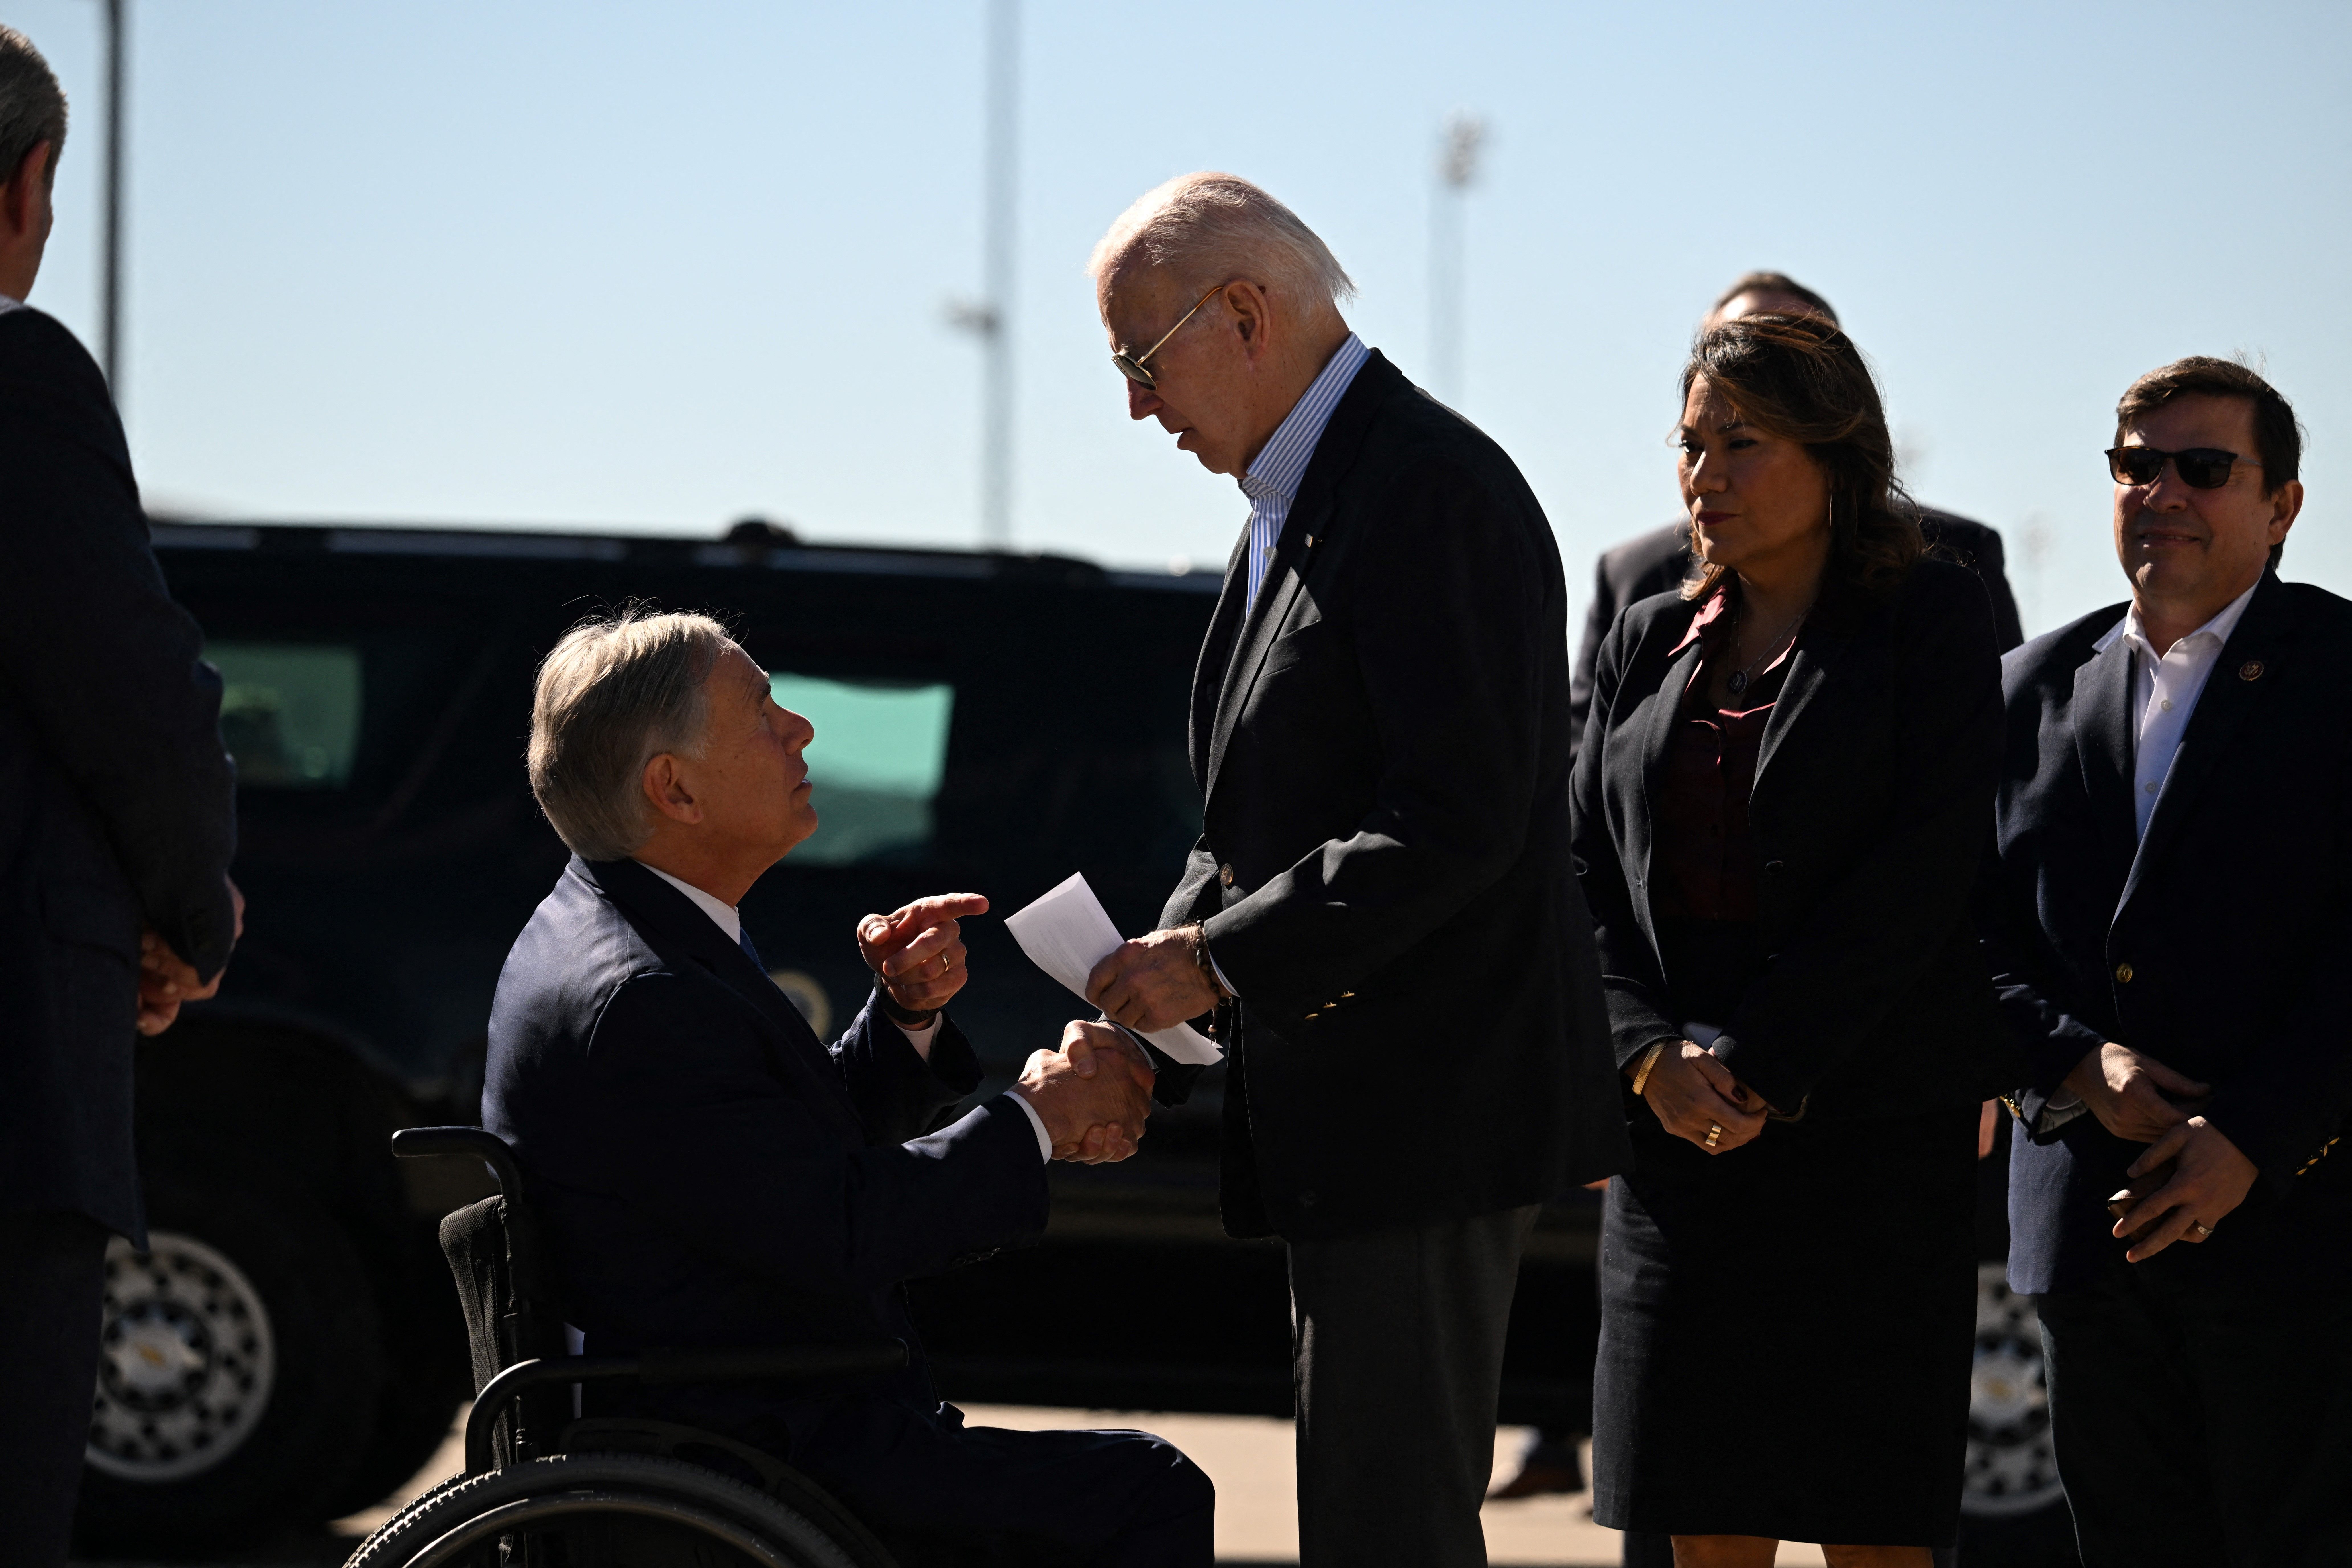 US President Joe Biden shakes hands with Texas Governor Greg Abbott after Abbott handed him a letter outlining the problems on the southern border upon arrival at El Paso International Airport in El Paso, Texas, on January 8, 2023. (Photo by Jim WATSON / AFP) (Photo by JIM WATSON/AFP via Getty Images)